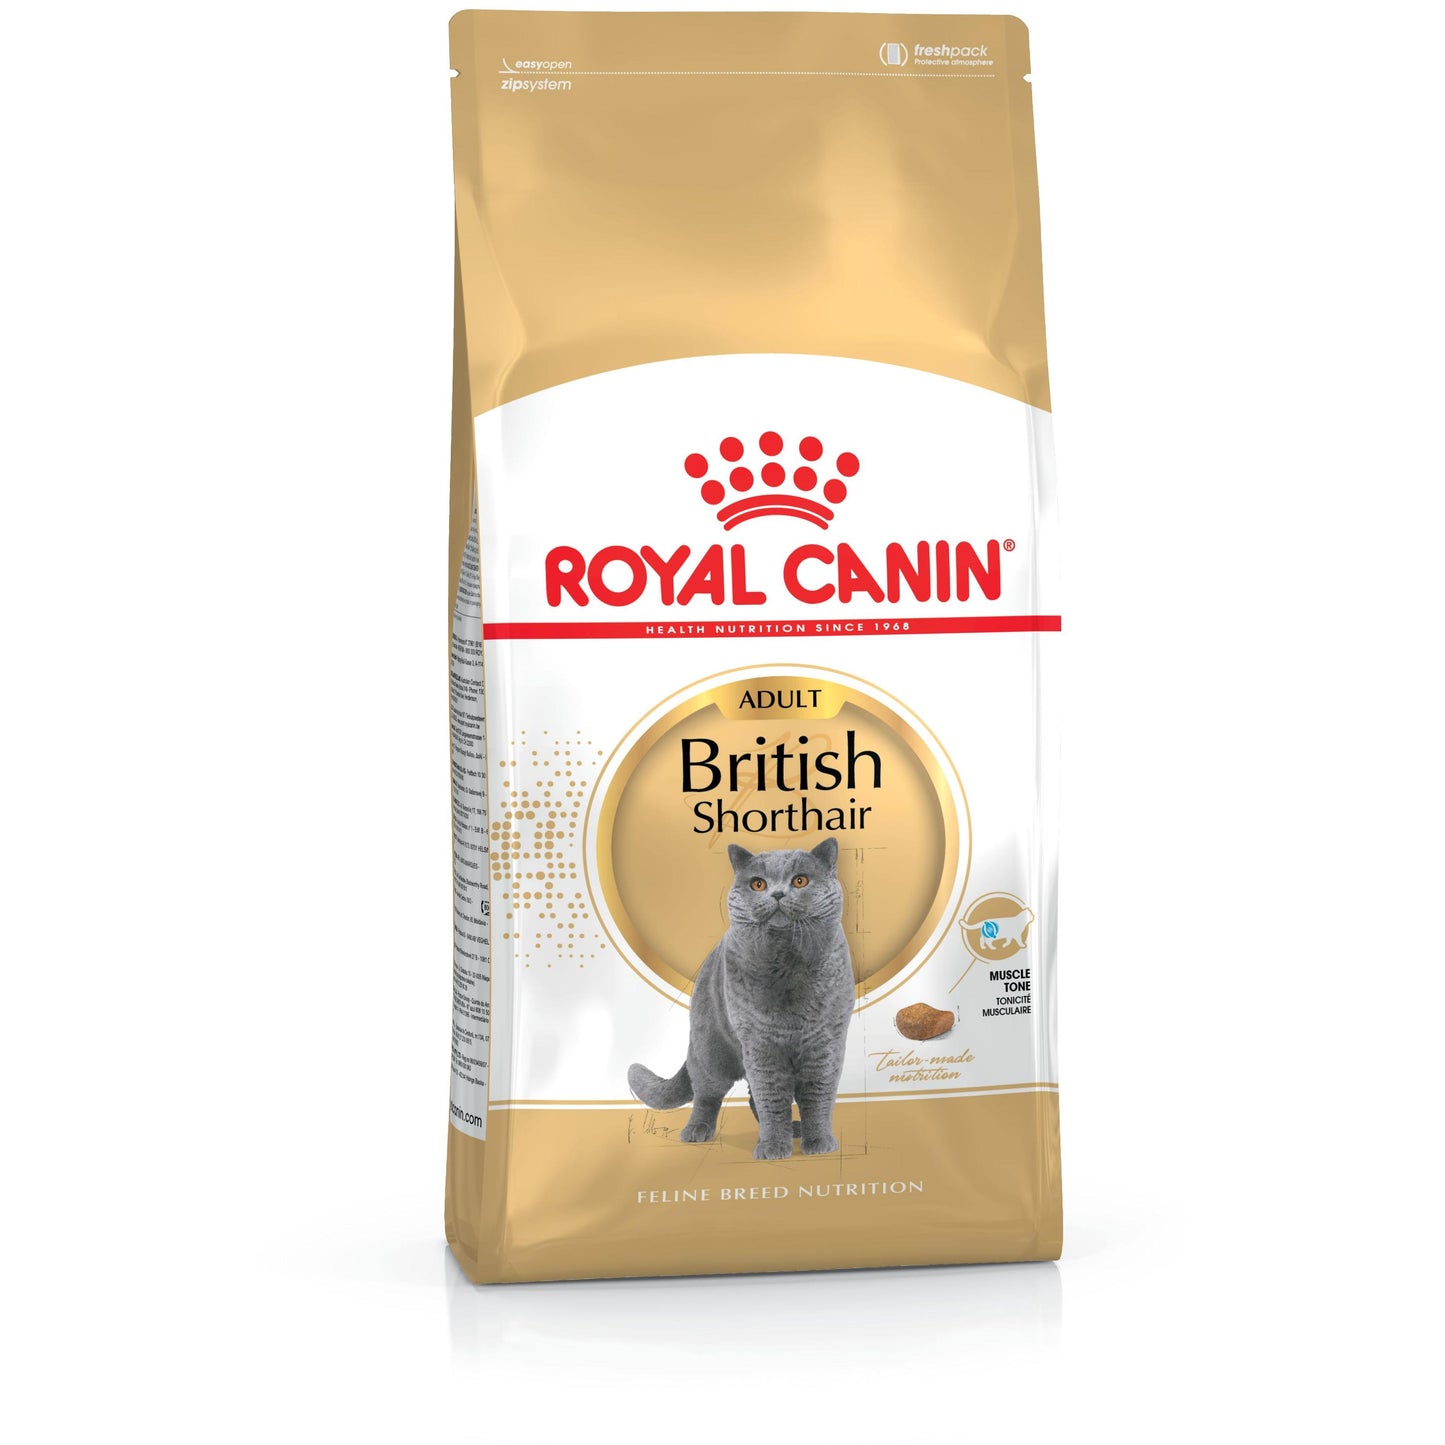 Royal Canin British Shorthaired Dry Cat Food